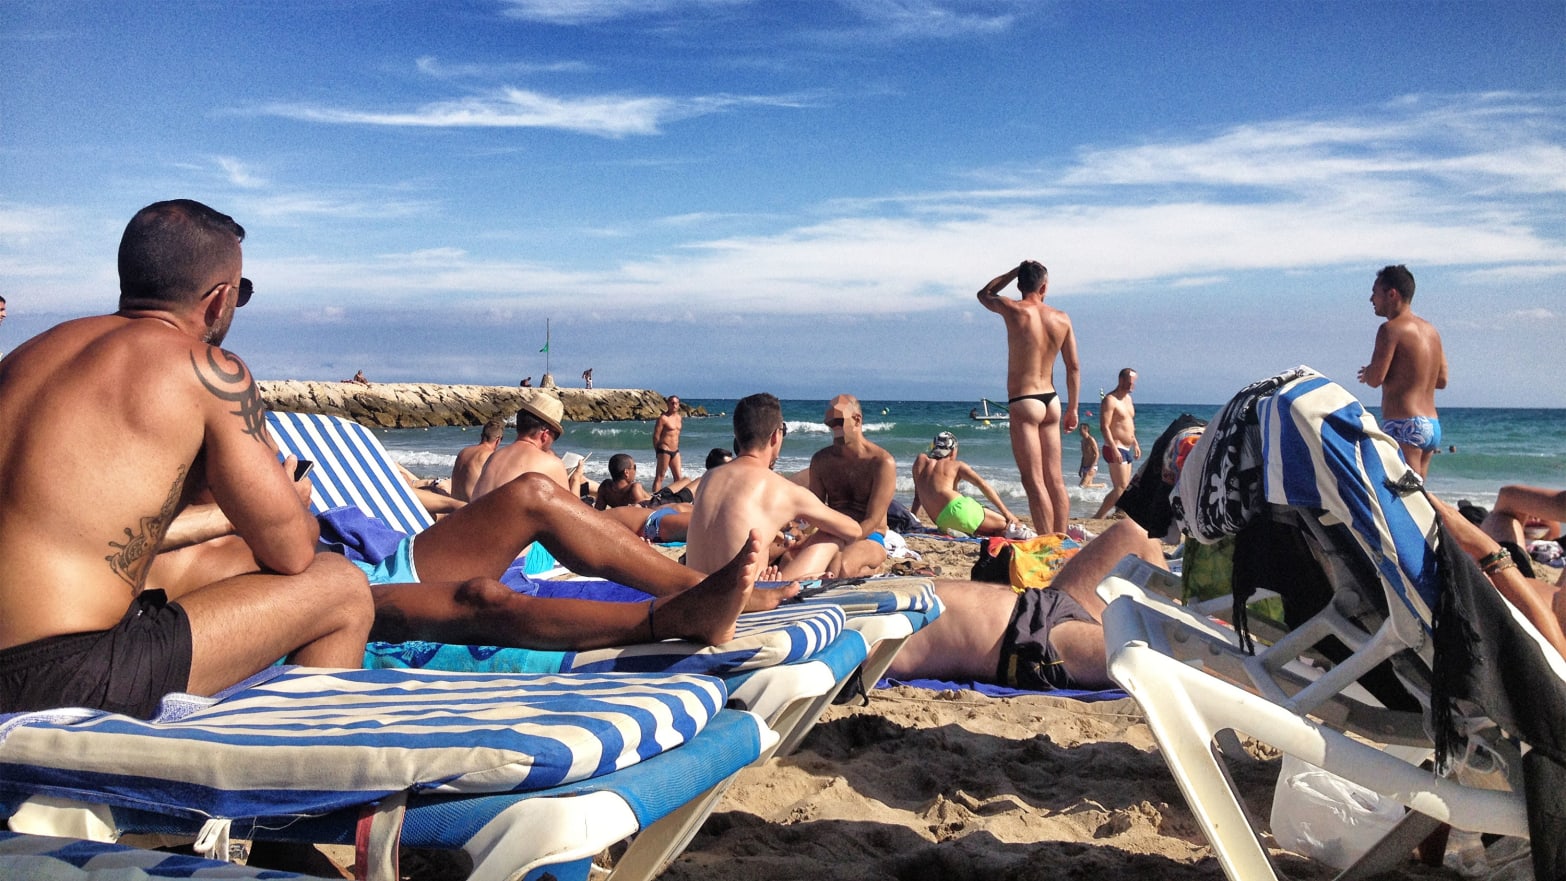 anirban nandy recommends russian nudists beach pic